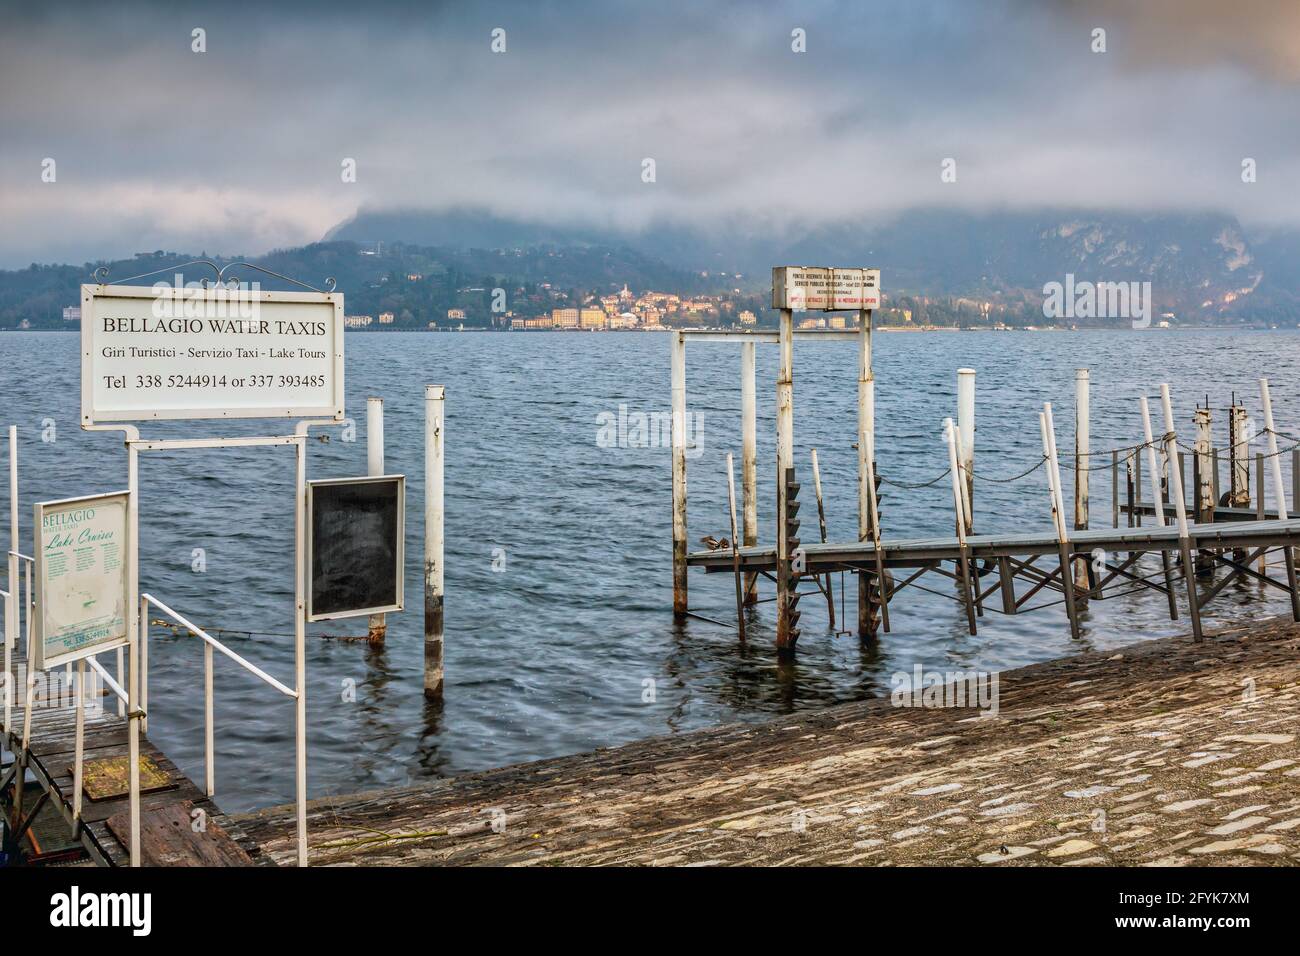 Jetty for Bellagio Water Taxis offering lake tours at Bellagio on Lake Como. Stock Photo